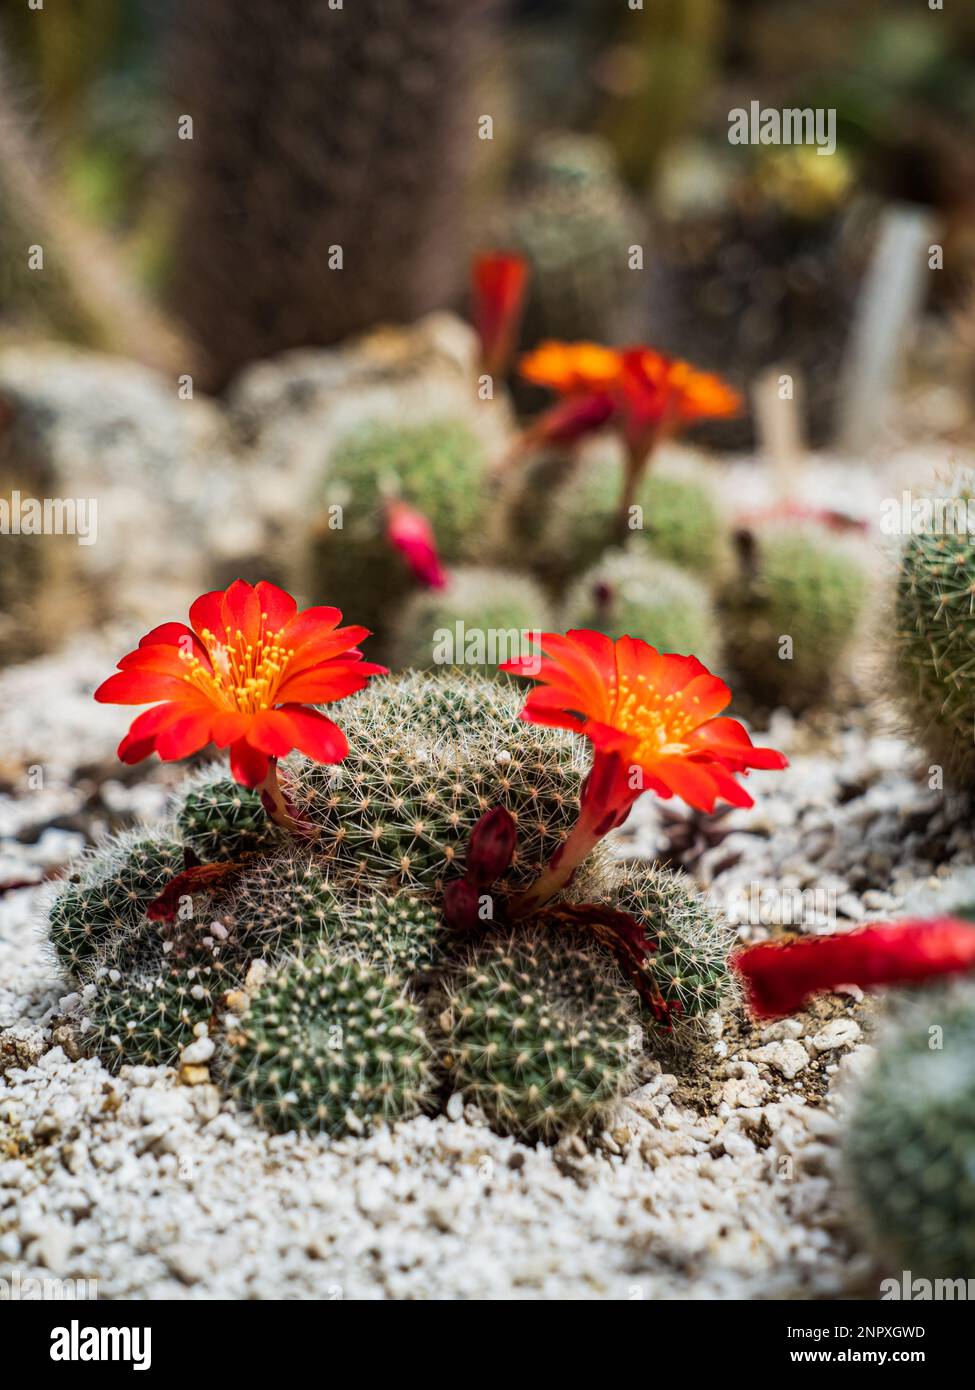 Red flowering rebutia cactus on rocky ground natural blurry background Stock Photo